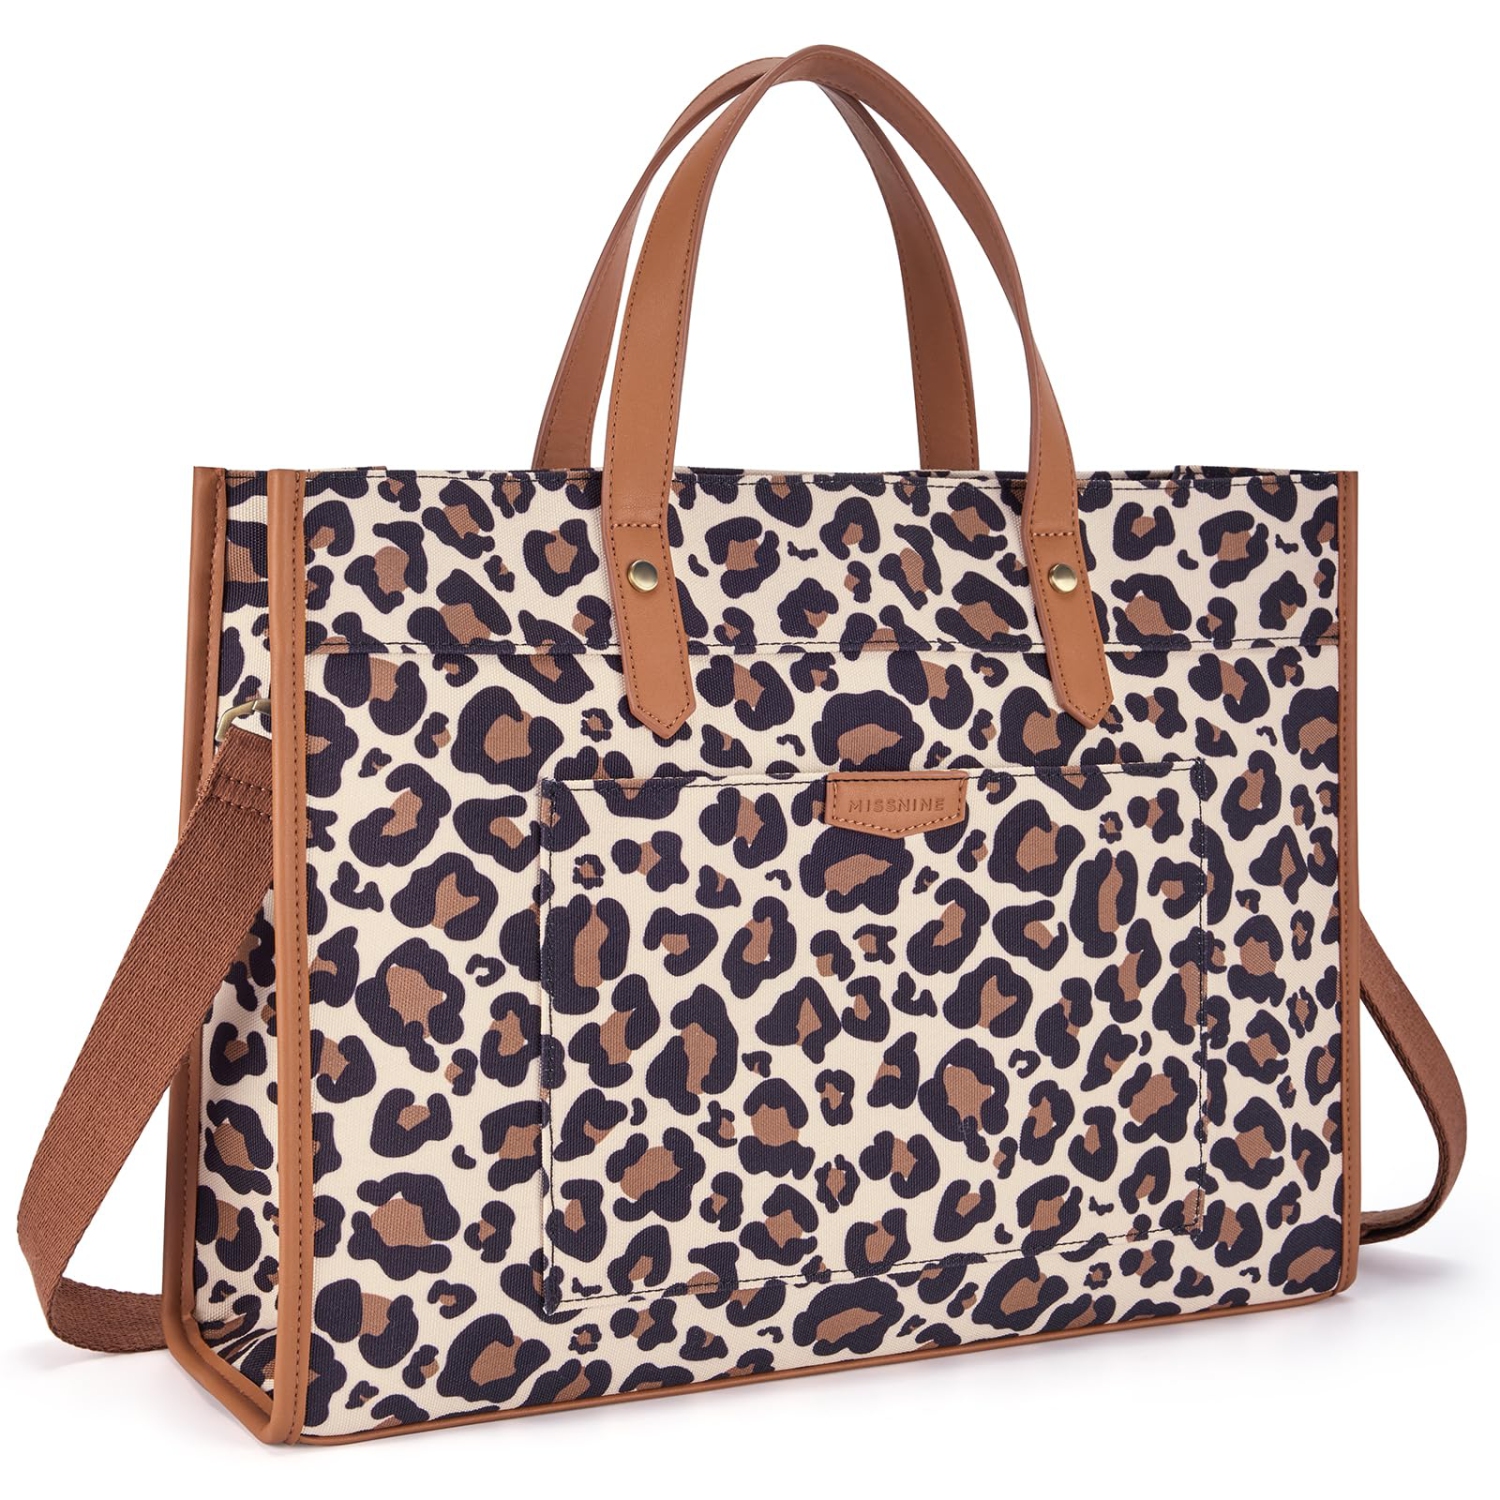 Stylish Leopard Print Canvas Laptop Tote Bag for 15.6 inch Laptop, Perfect for Work, Travel, and School